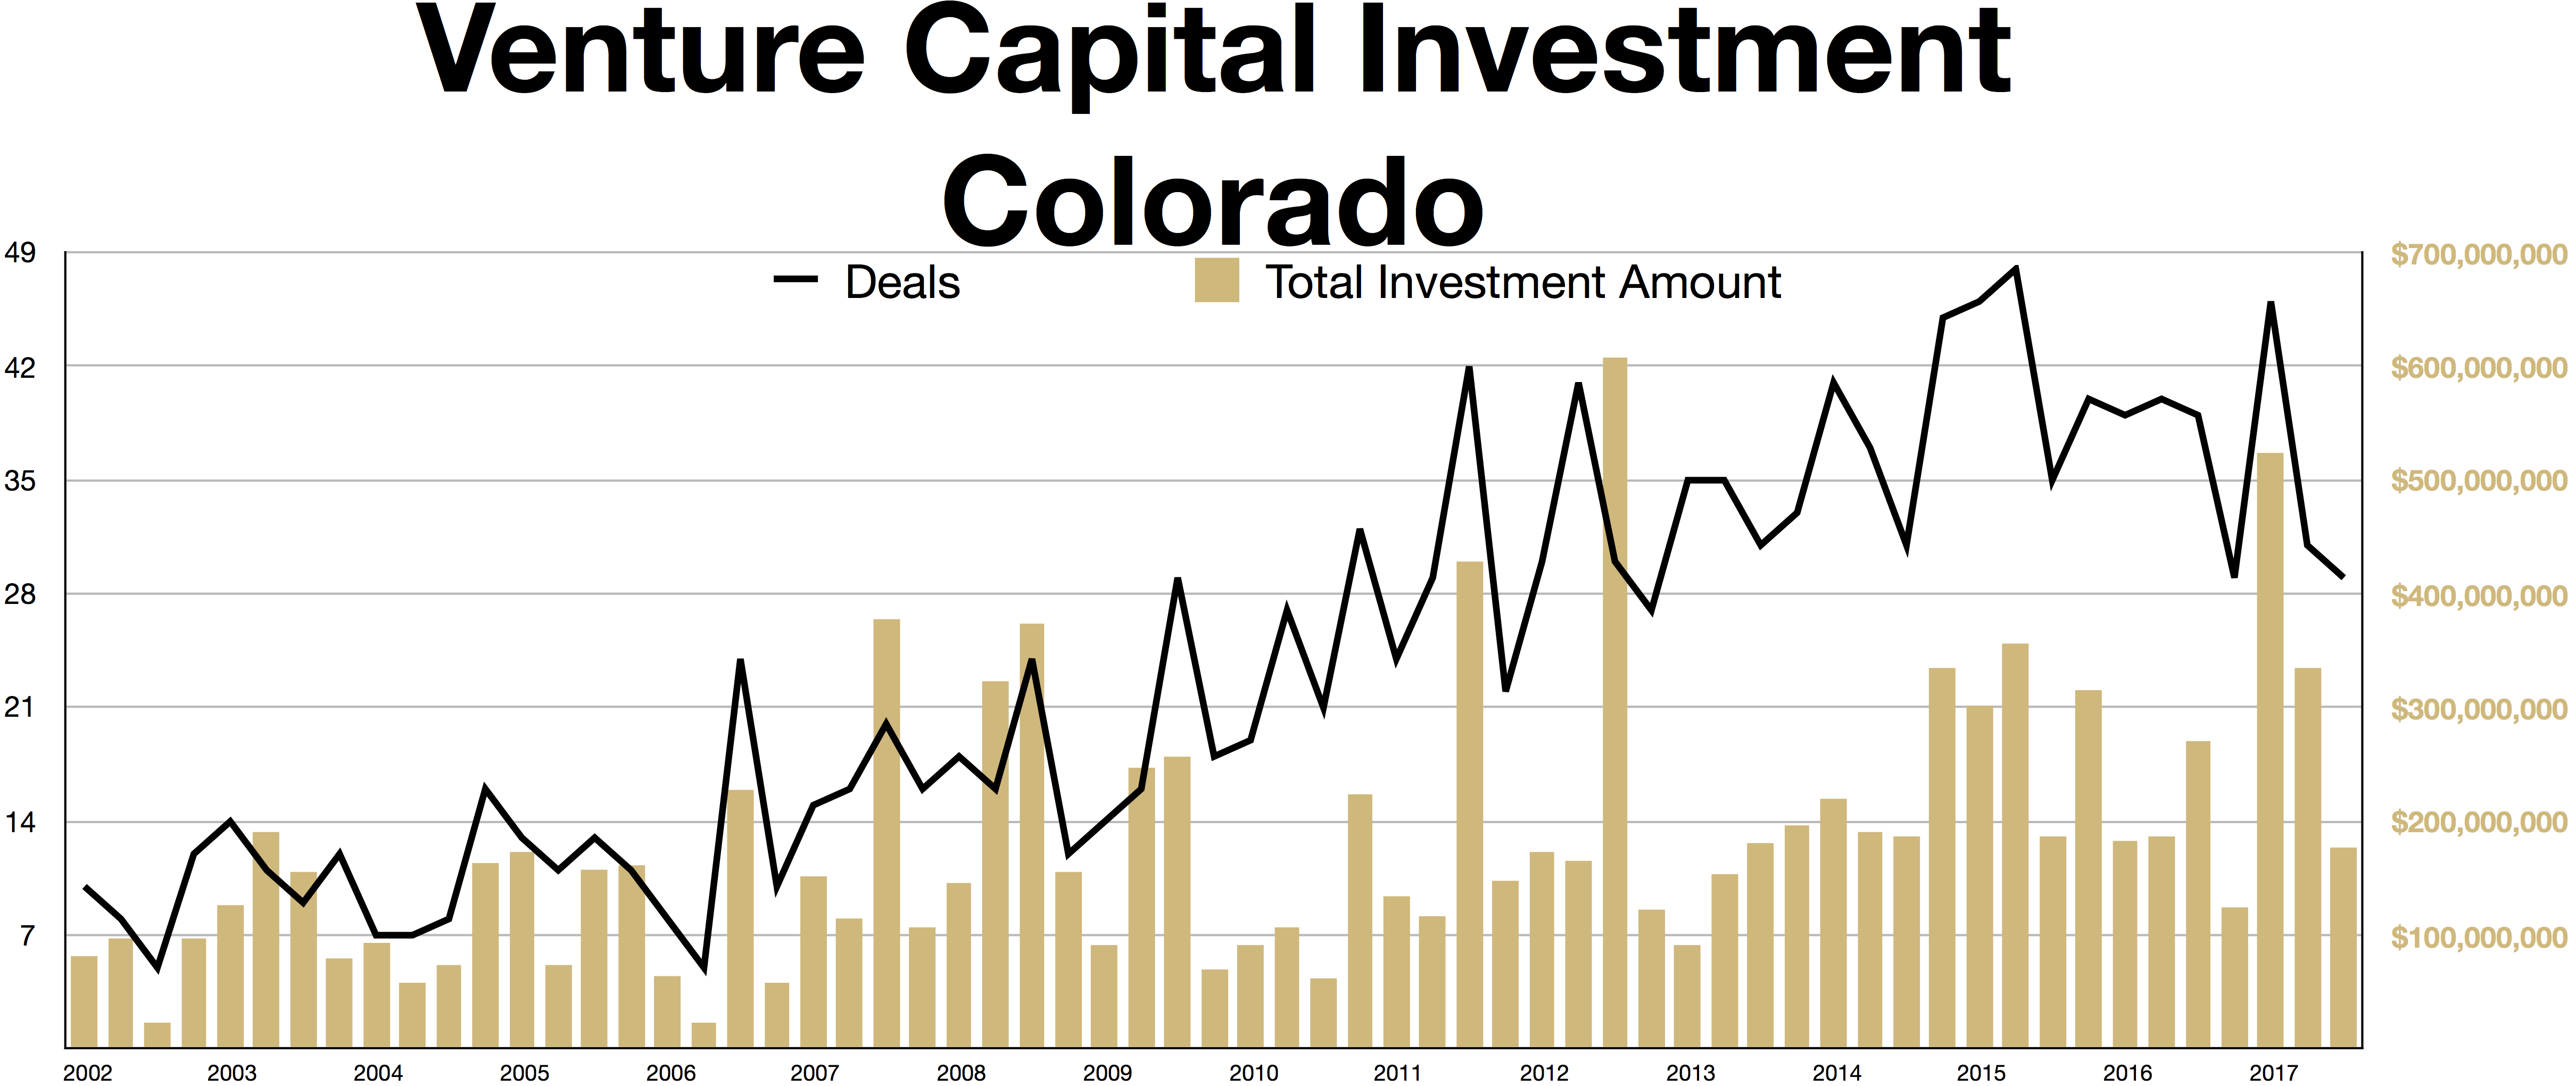 Colorado Venture Capital.png English: Colorado Venture Capital Investment Date 30 October 2017 Source Own work https://www.pwc